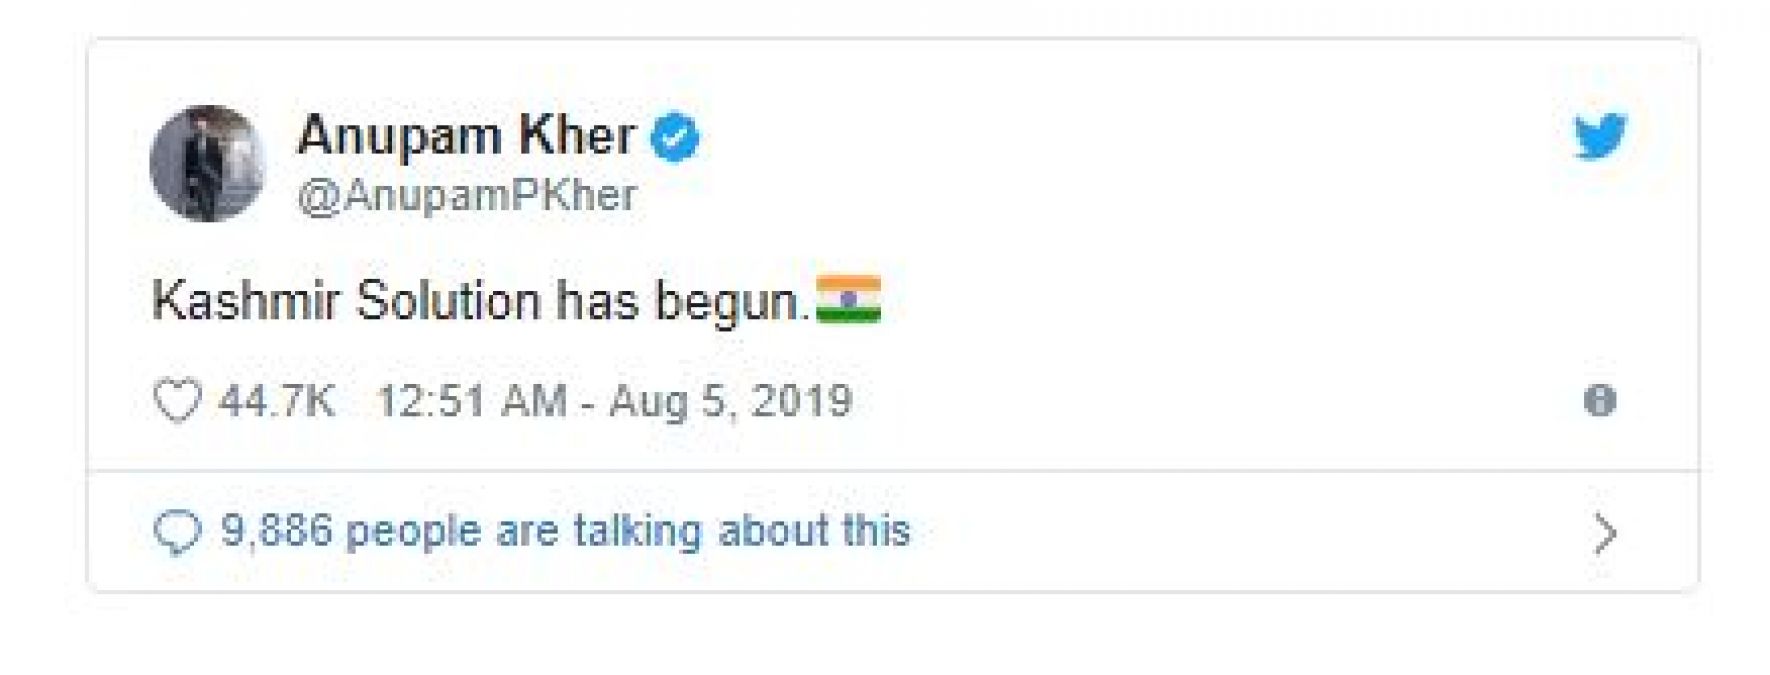 Anupam Kher also gets the news, something big to happen in Kashmir, did this tweet!